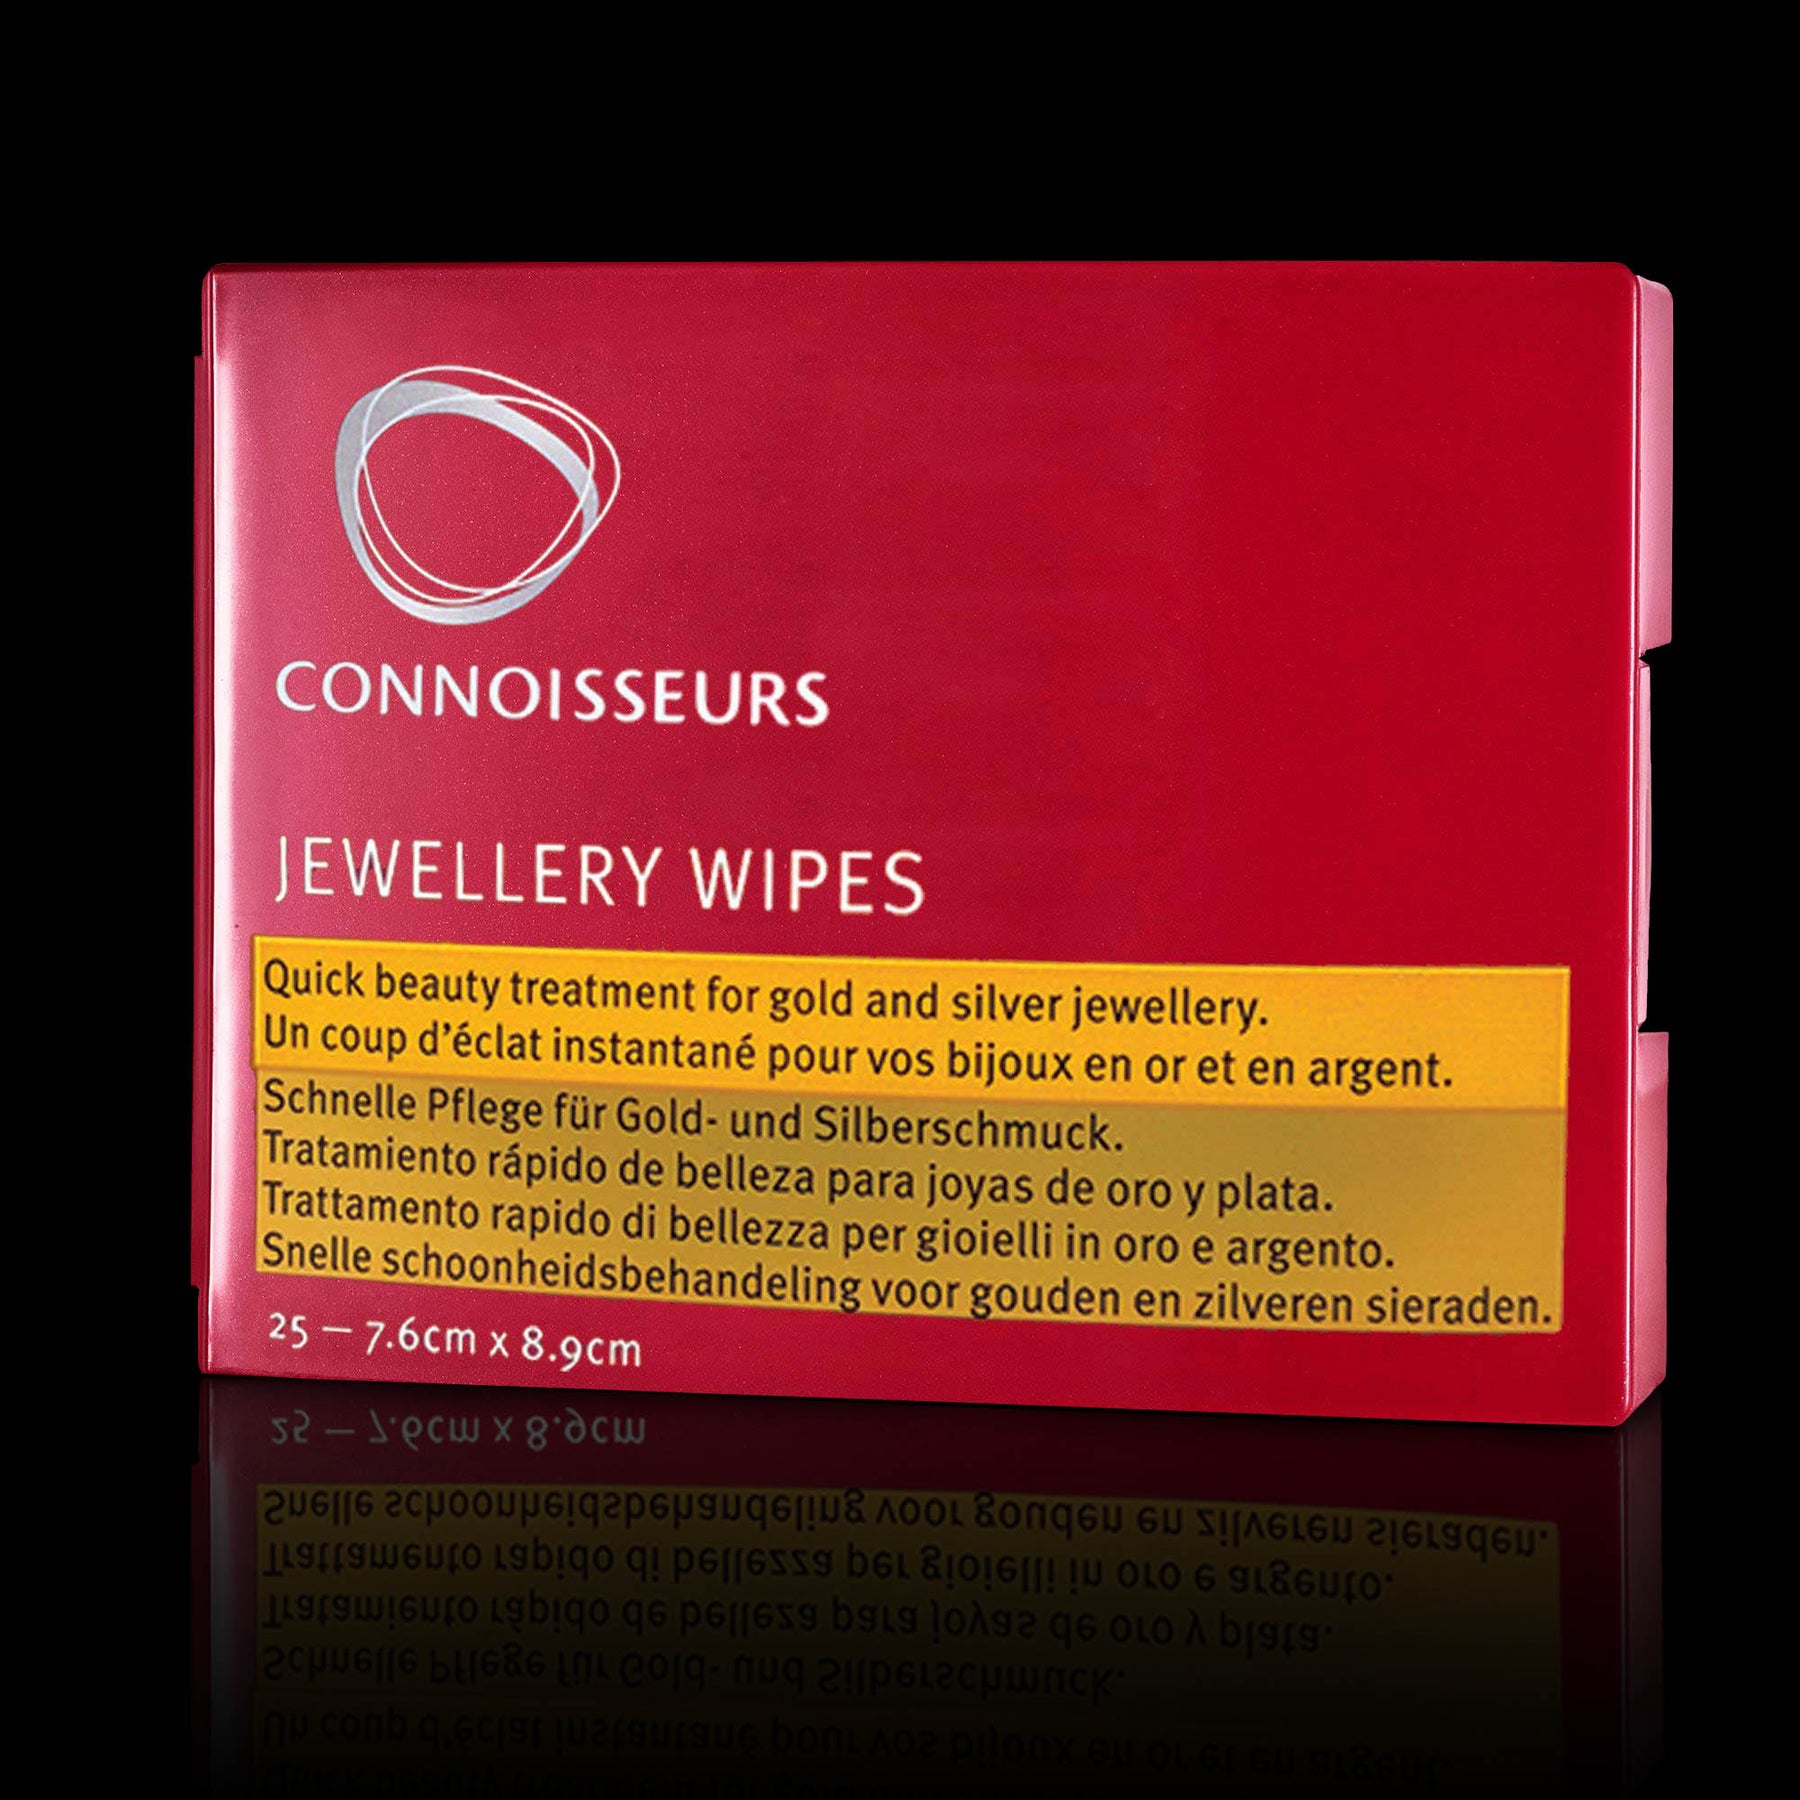 Connoisseurs Jewelry Wipes – Mount-N-Repair